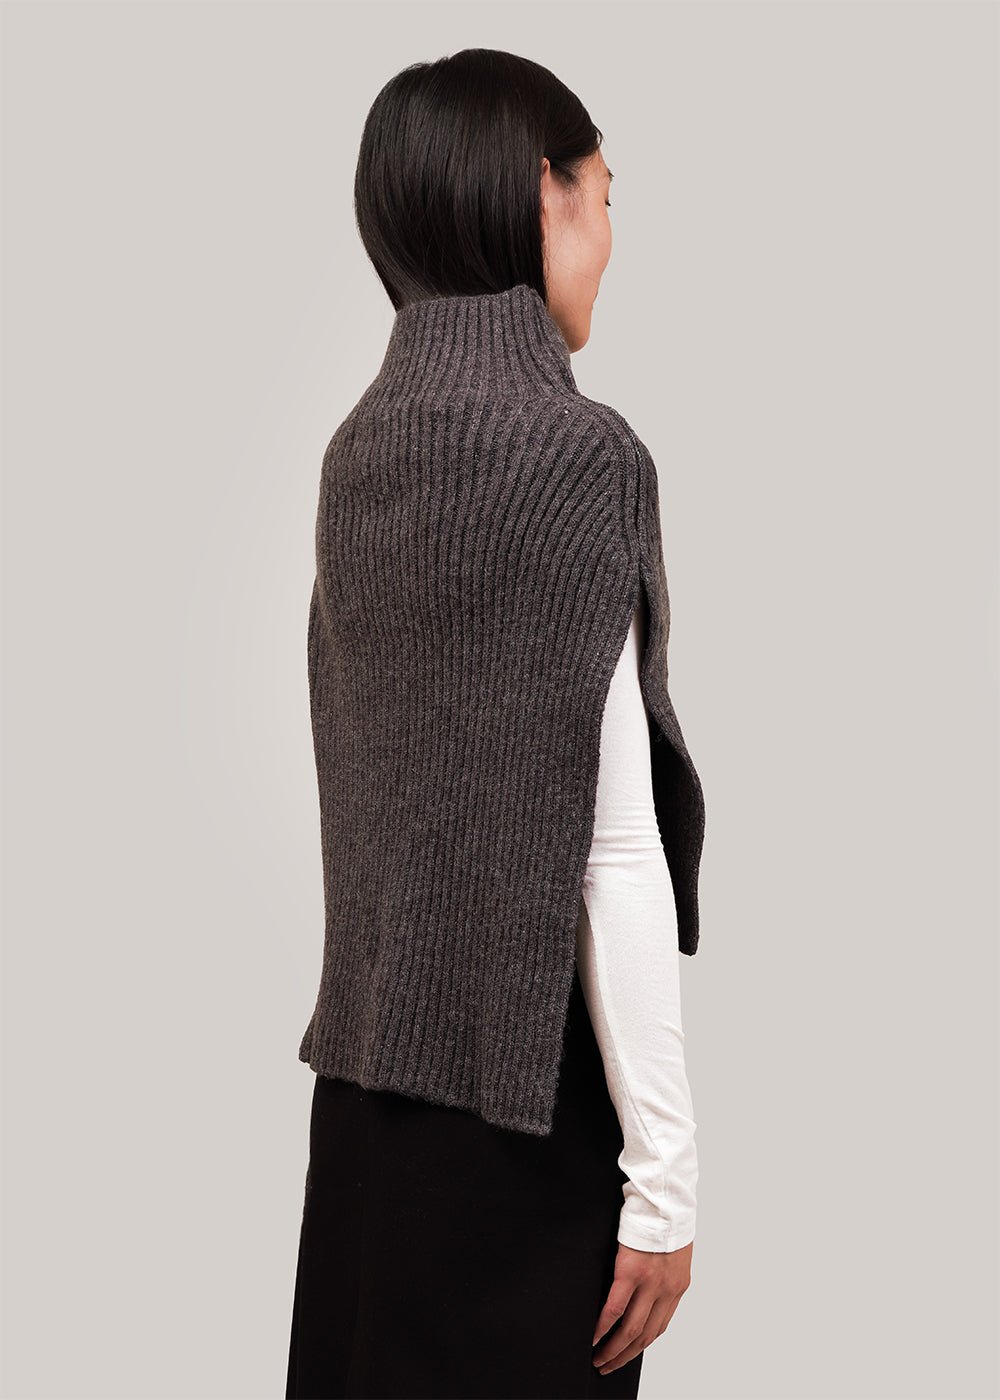 Mijeong Park Charcoal Neck Warmer - New Classics Studios Sustainable Ethical Fashion Canada